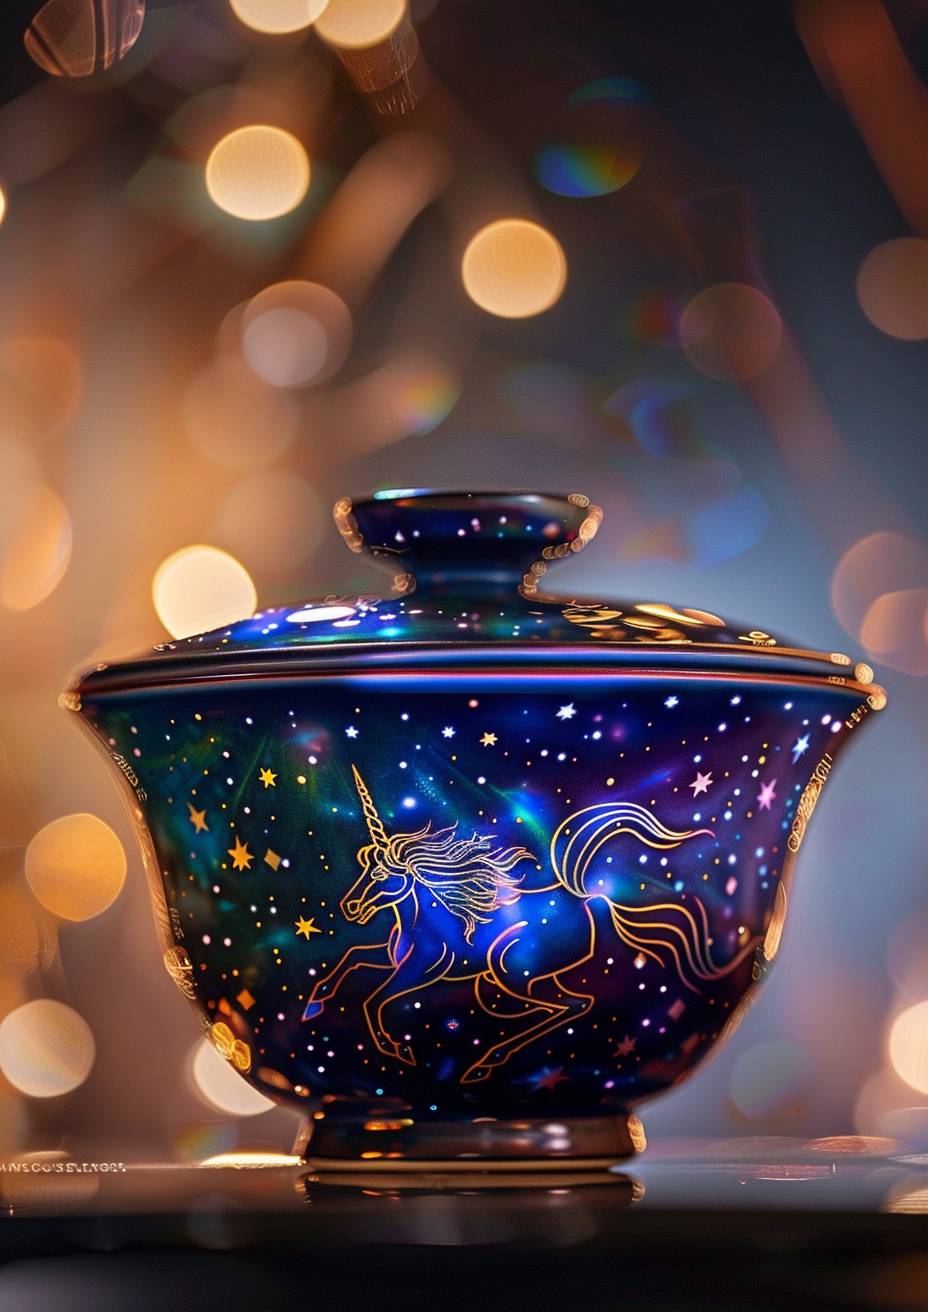 A gaiwan lidded bowl, dark ceramic, decorated with a spectral zodiac unicorn running through stars. Monoceros constellation, tenebrism, glowing points of light, bokeh background